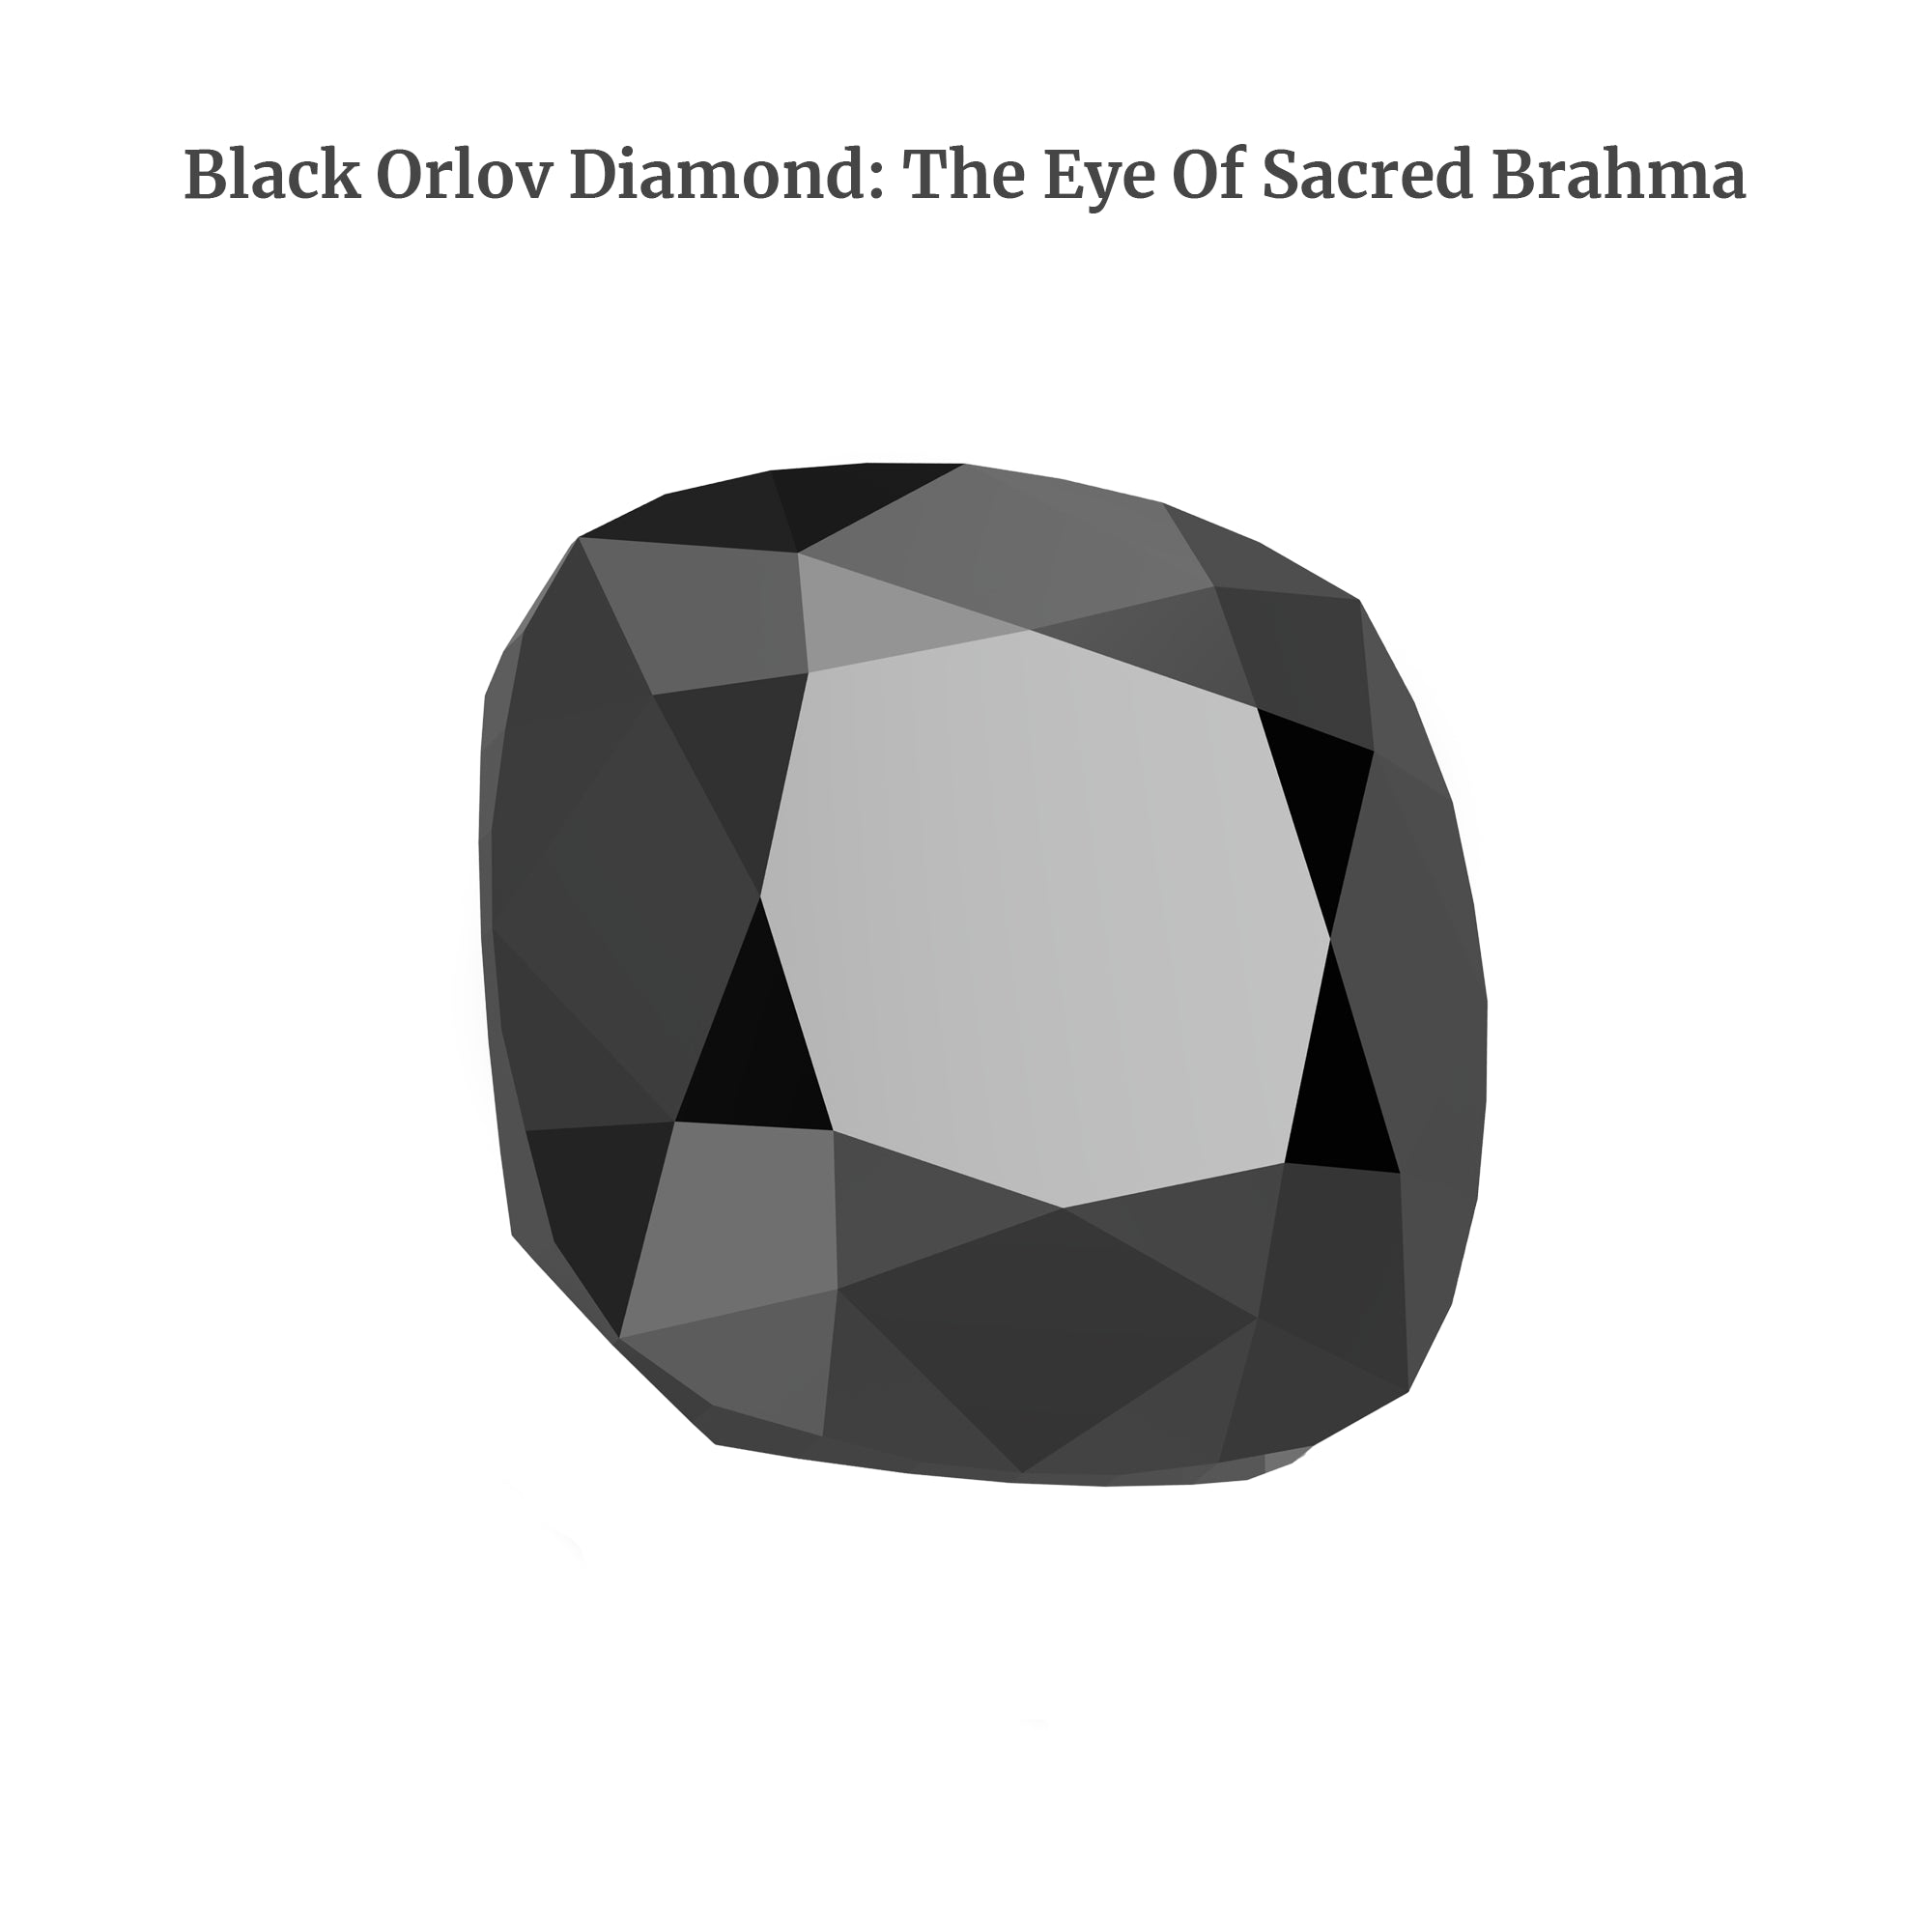 Top 10 Facts about Black Diamonds